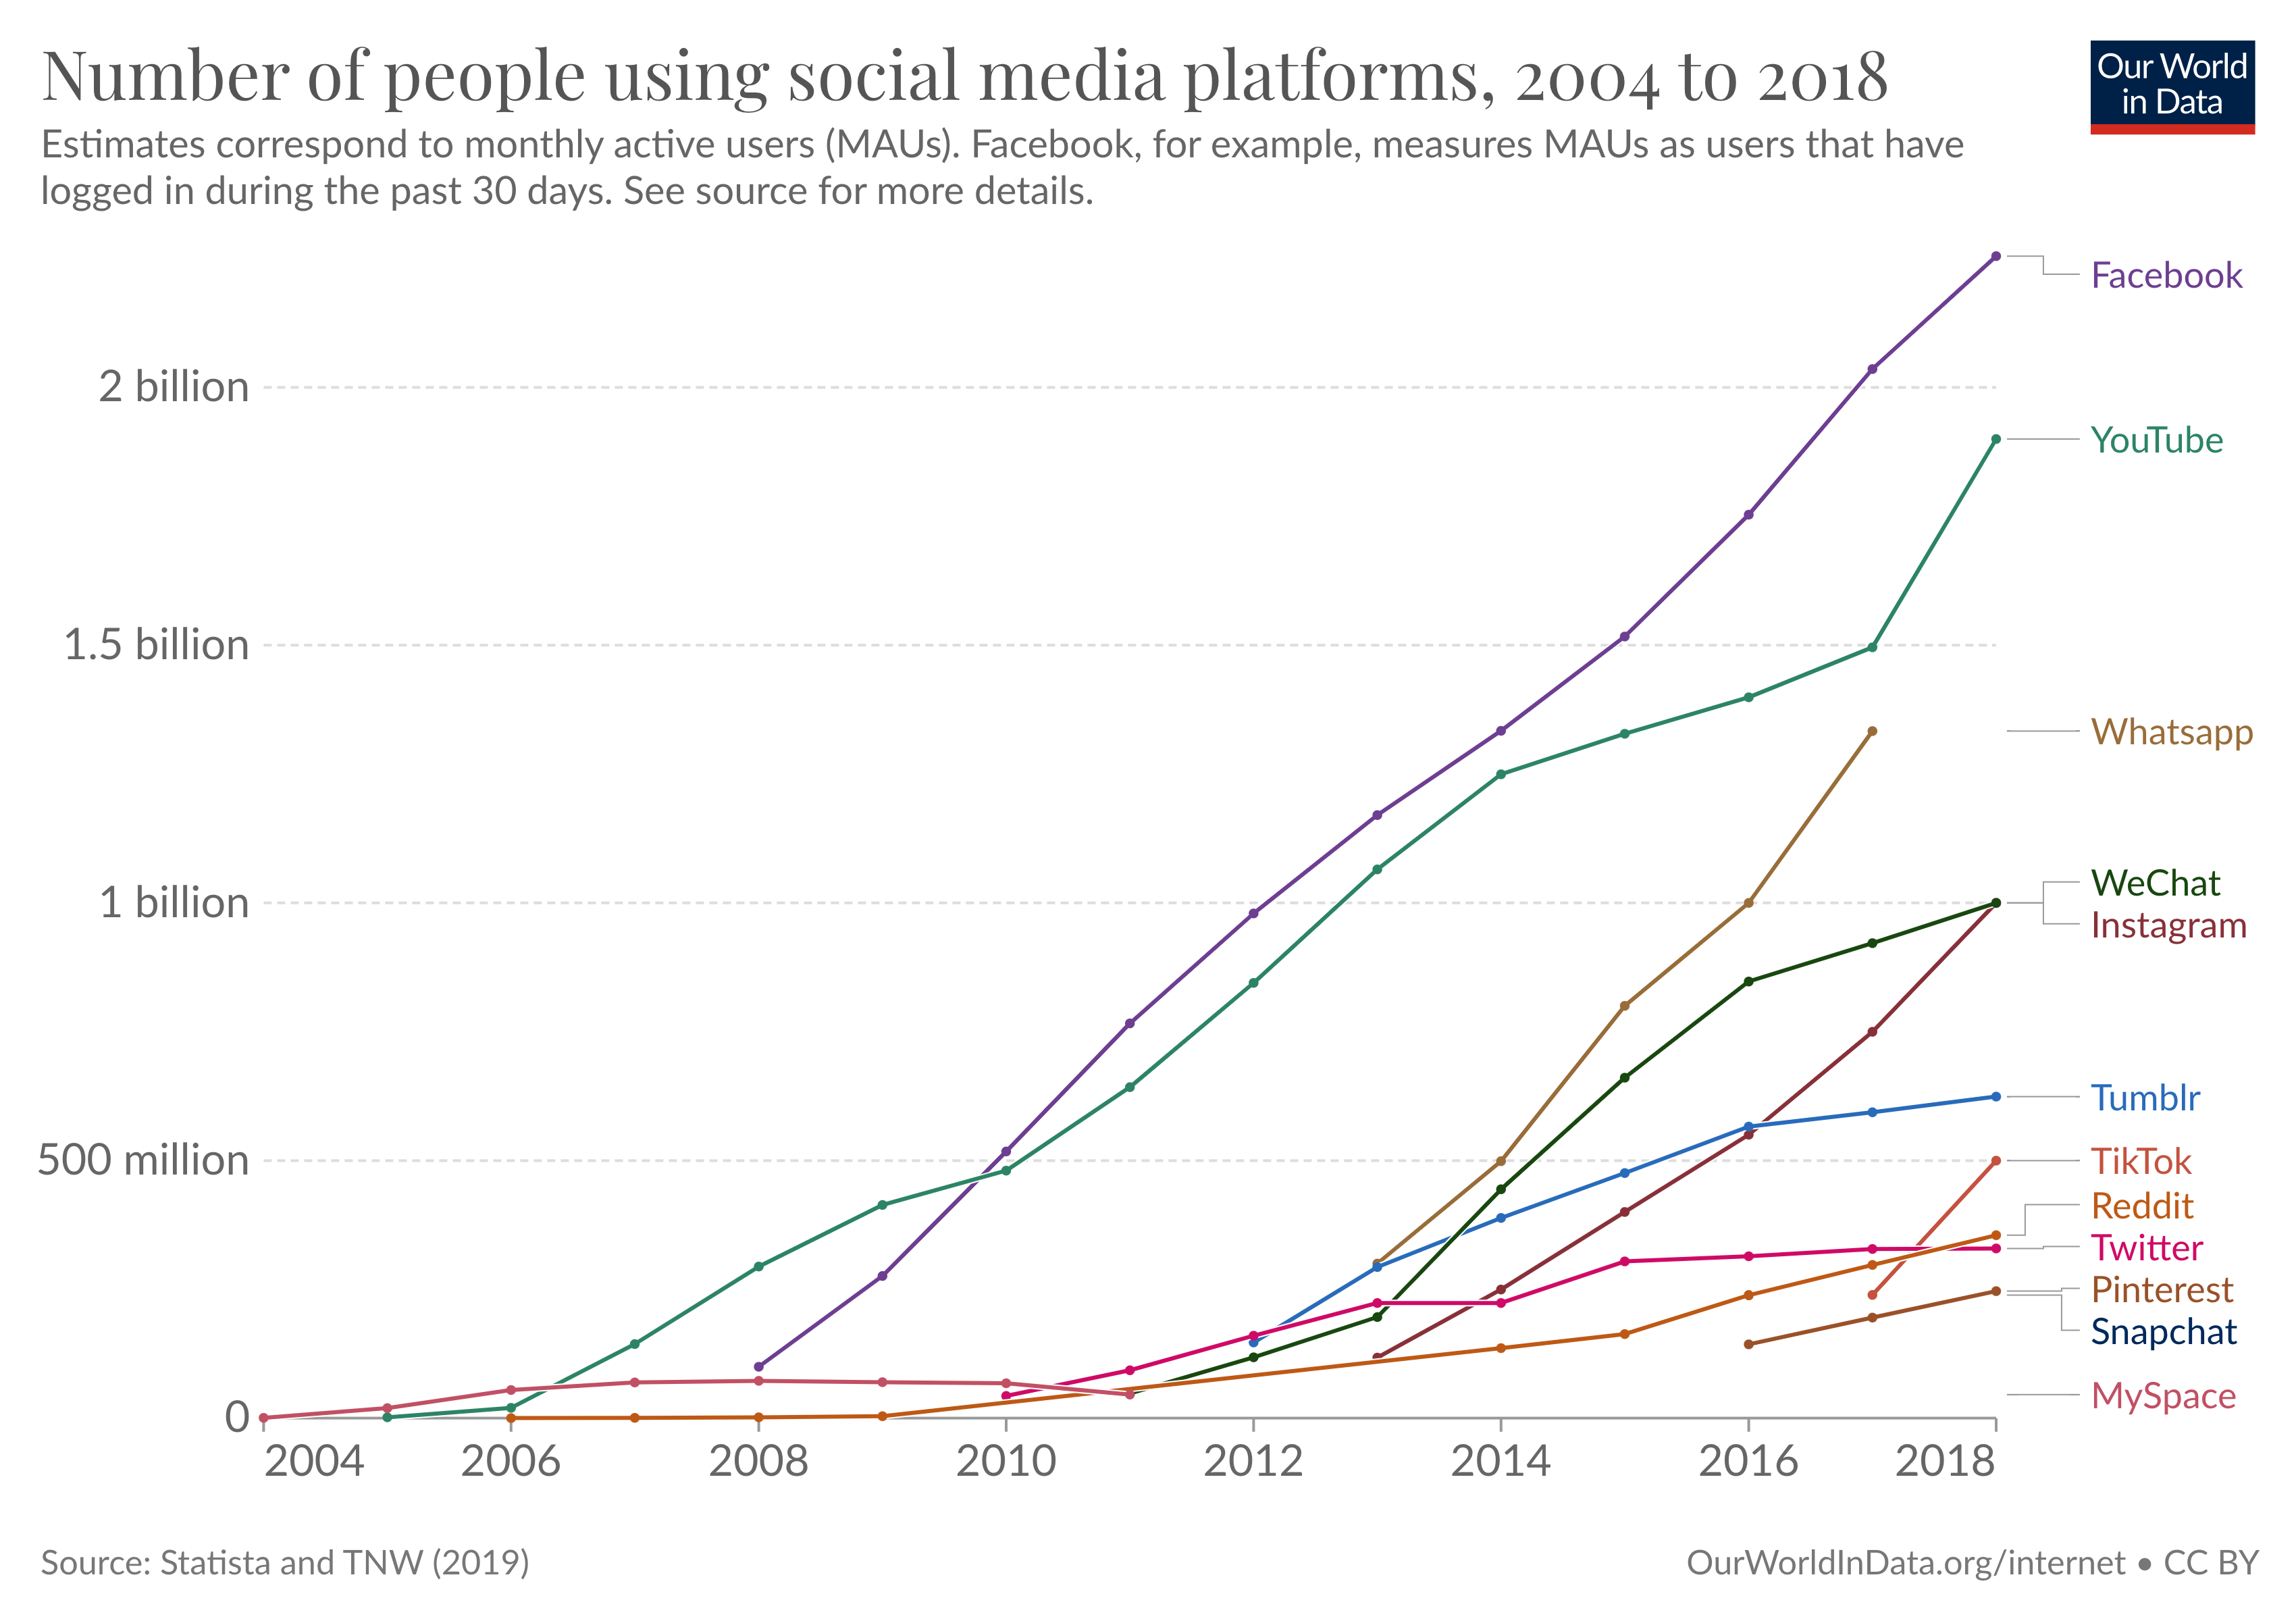 Line chart of social media users by platform where most have grown rapidly over time.